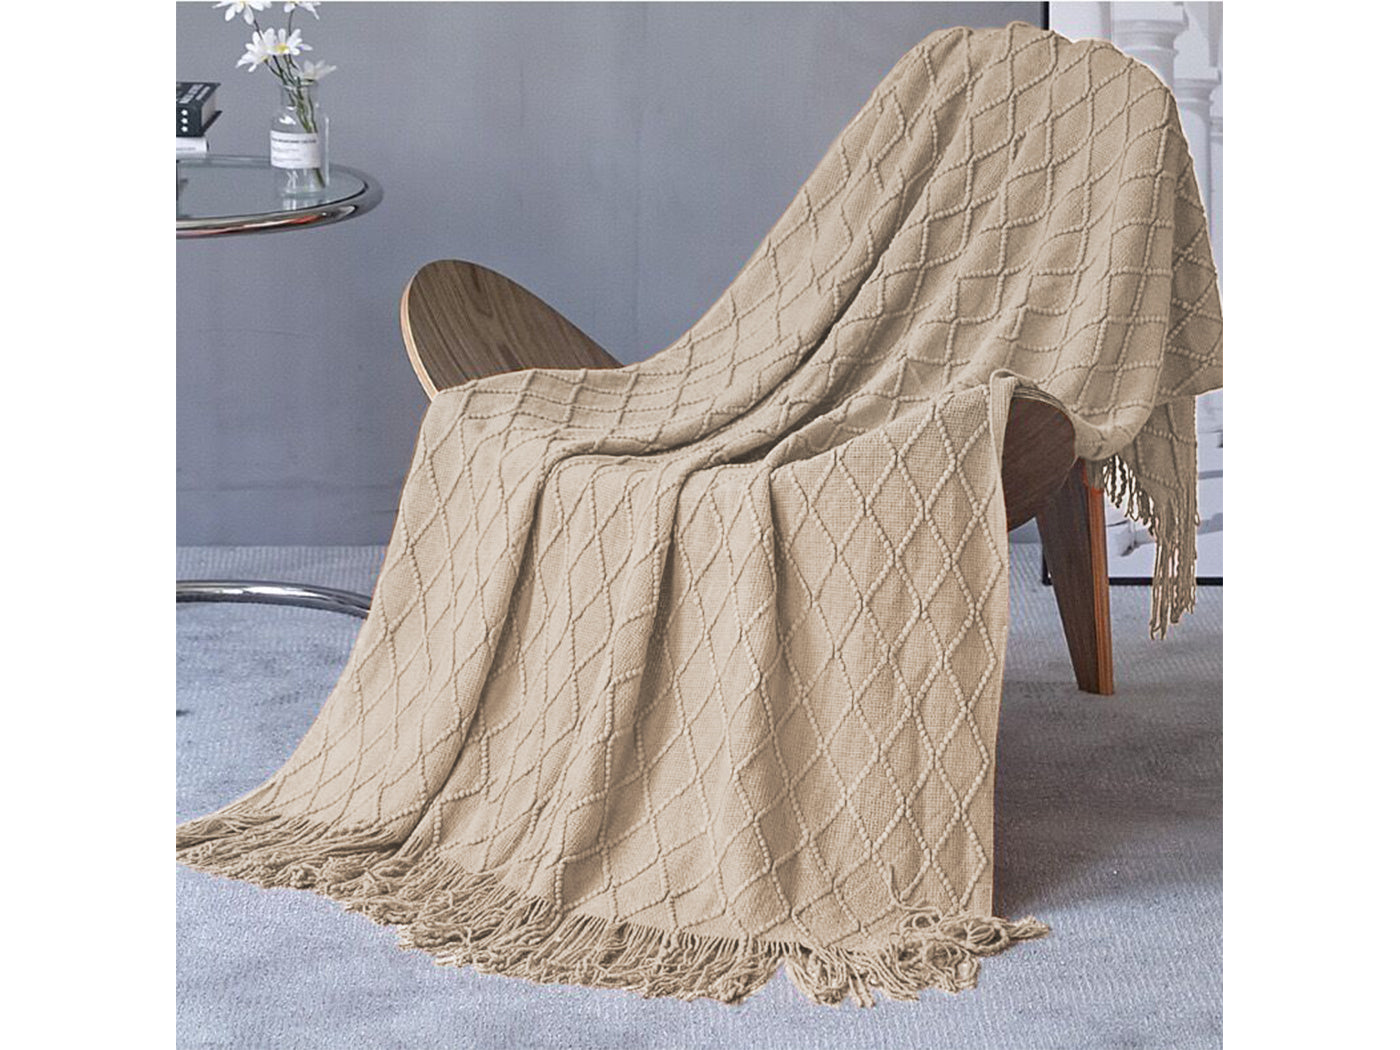 Dodolly Diamond Textured Knitted Solid Sofa Blankets with Tassel Cozy Soft Lightweight Travel Blanket for All Seasons, Khaki, 500g